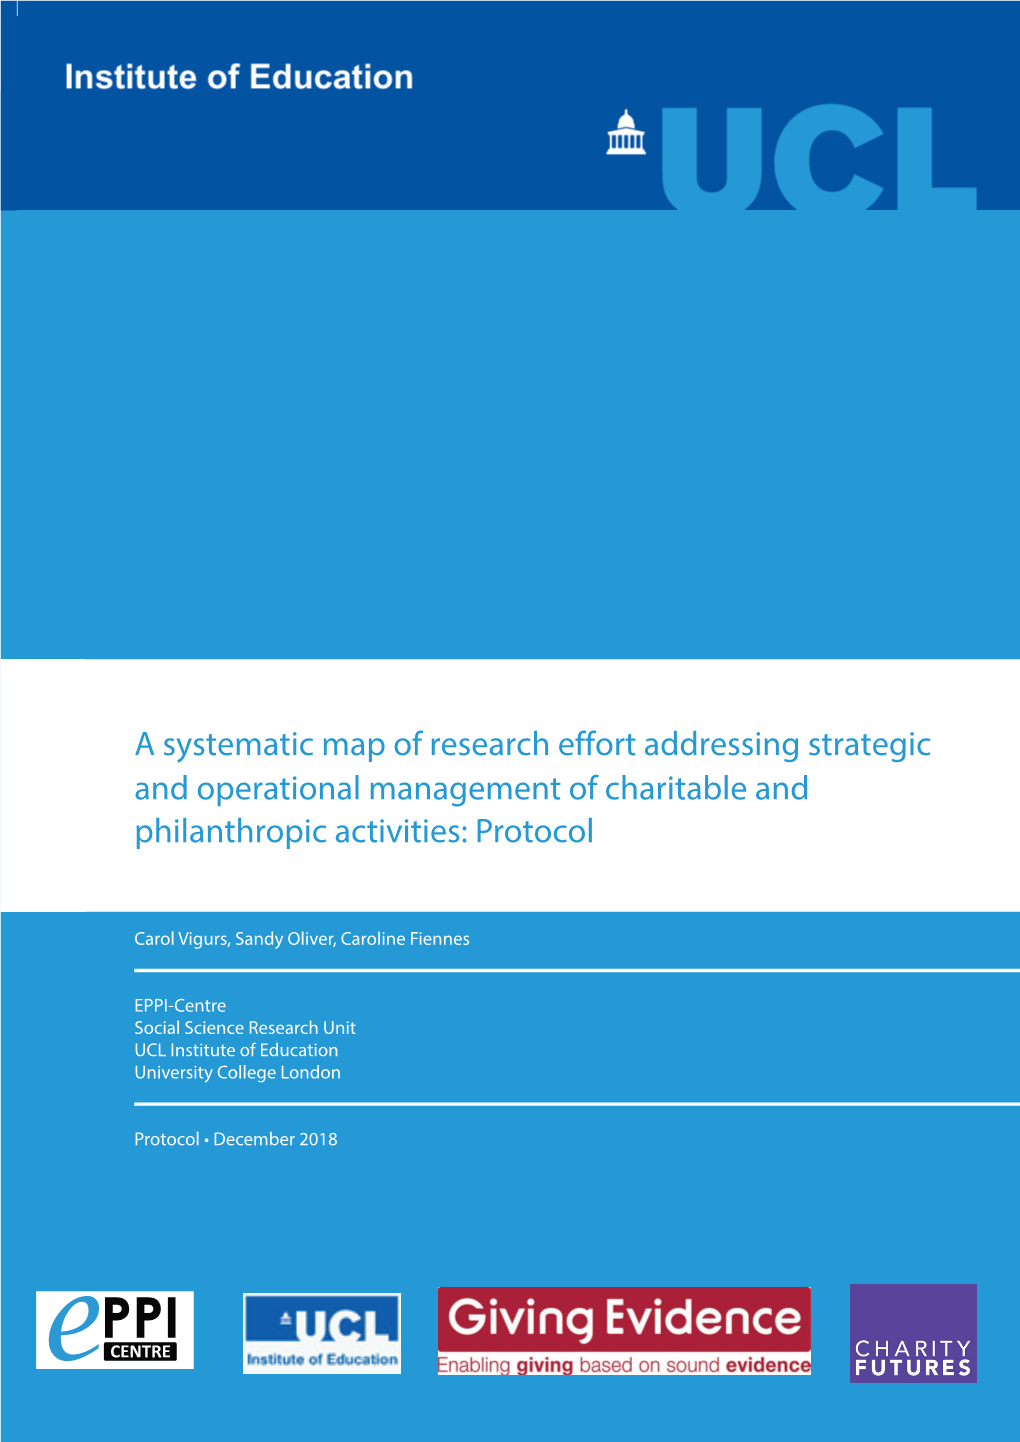 A Systematic Map of Research Effort Addressing Strategic and Operational Management of Charitable and Philanthropic Activities: Protocol